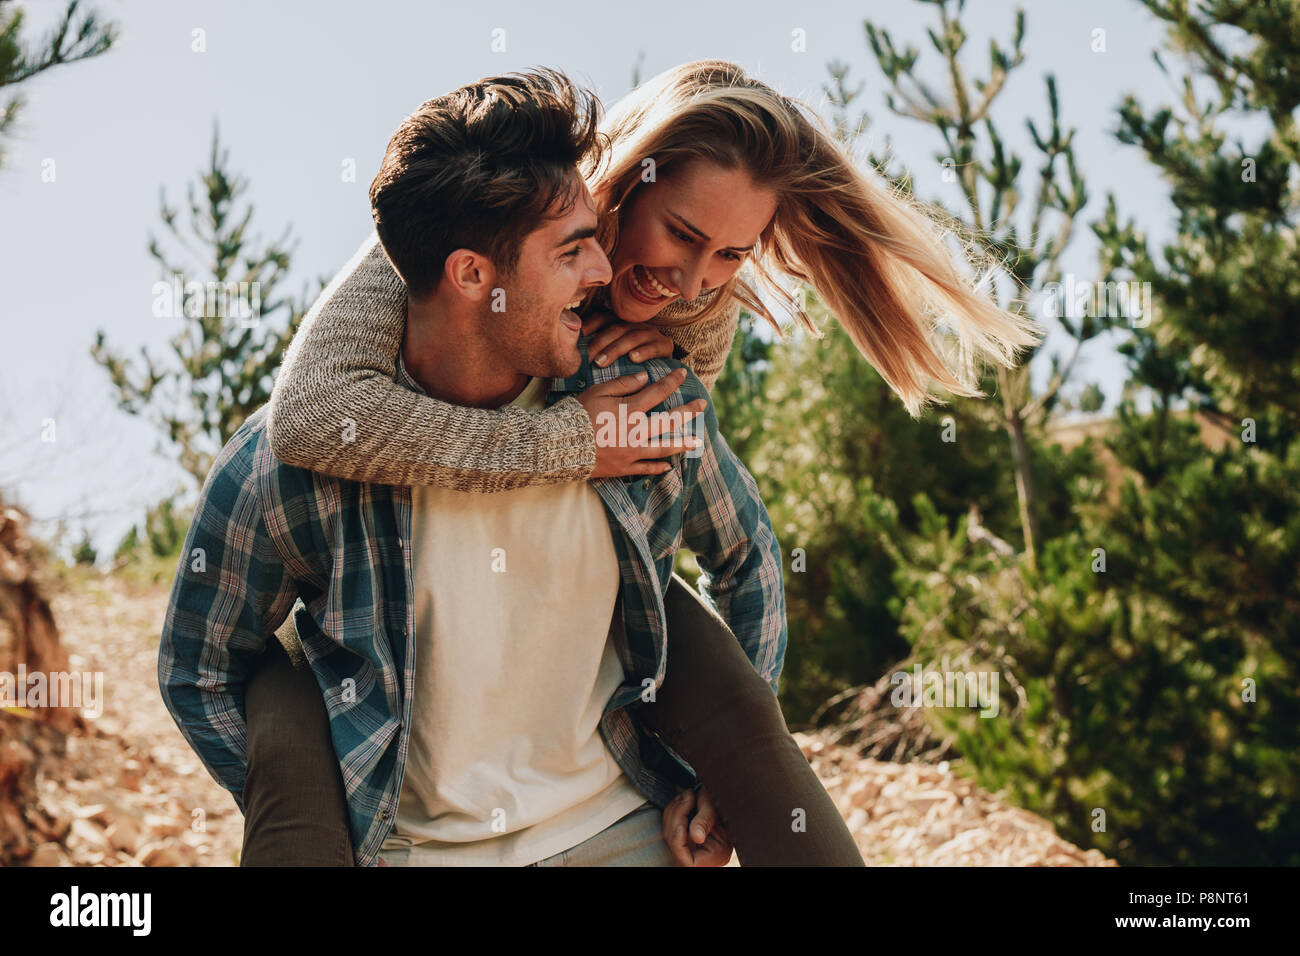 Man carrying girlfriend on his back while walking on a mountain trail. Couple enjoying themselves on a mountain trail. Stock Photo